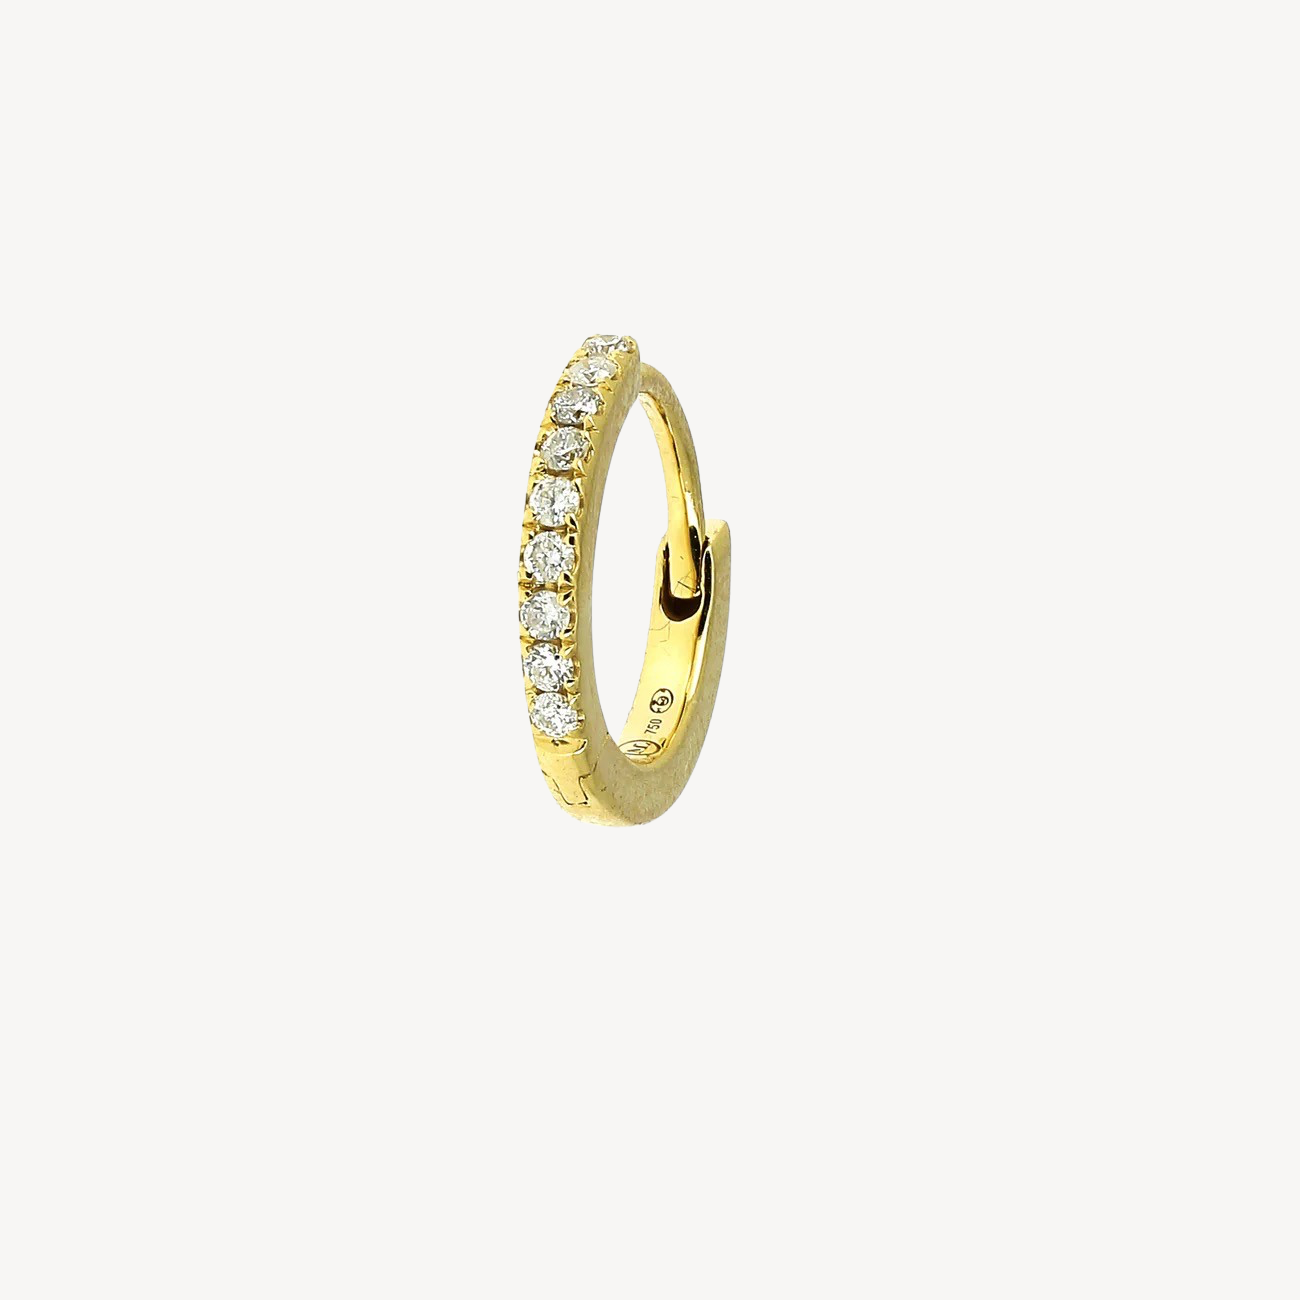 8mm Half Paved Yellow Gold Hoop